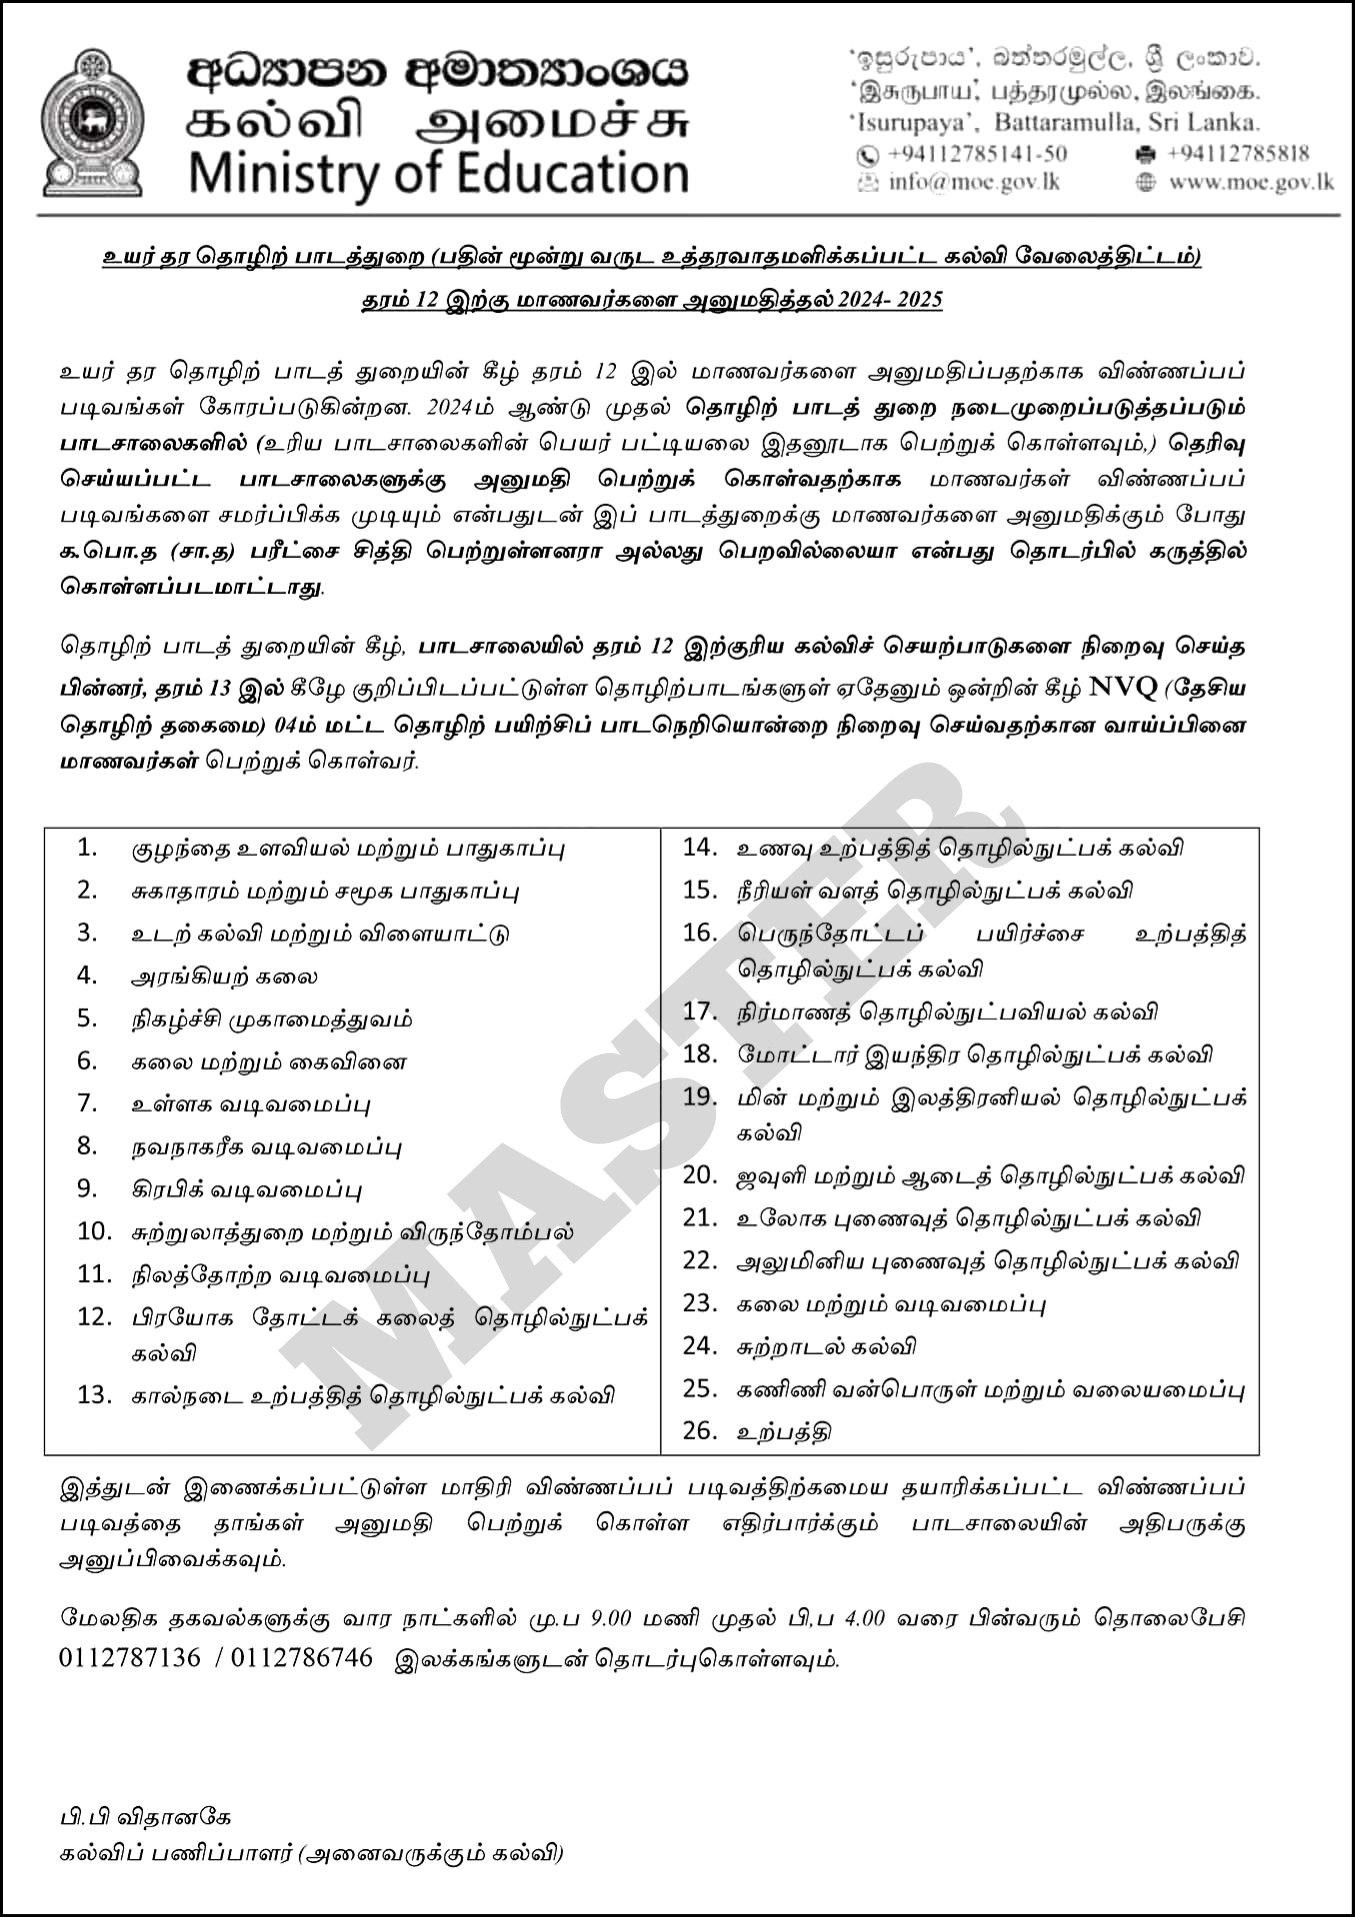 Admission for GCE.A/L Vocational Stream - 2024/2025